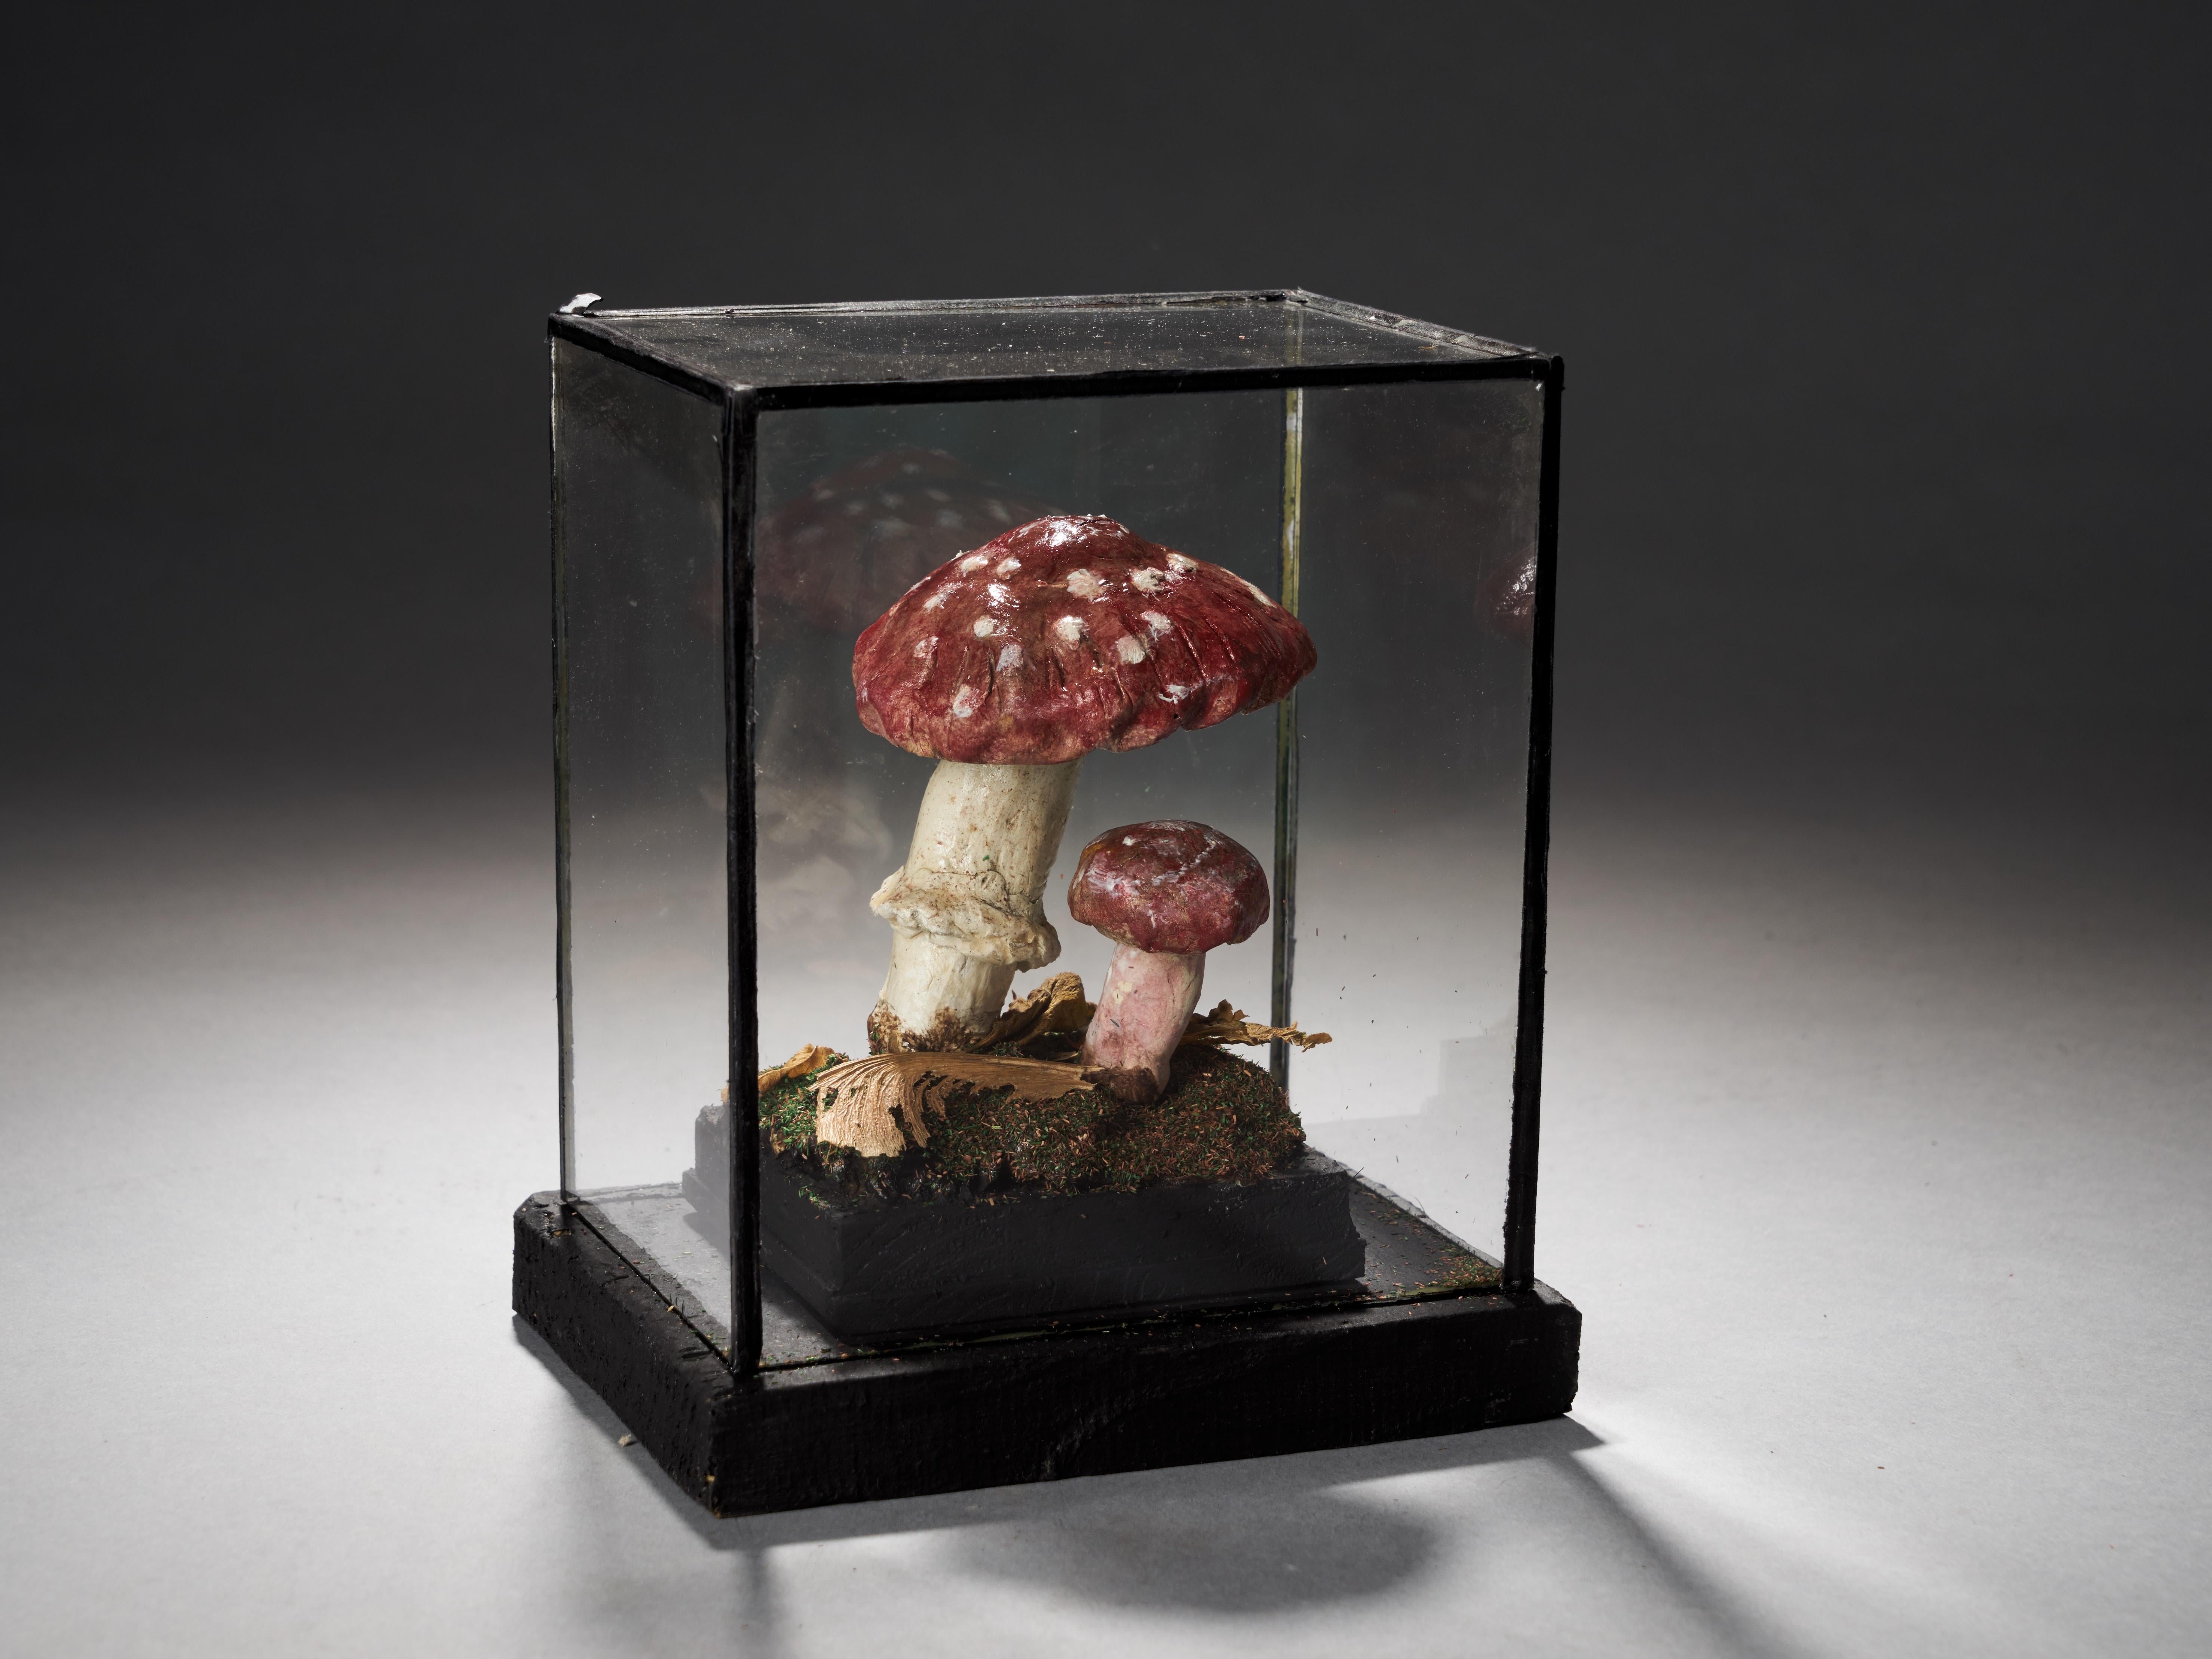 These models were carefully and very realistic designed after nature, in order to teach people the difference between poisonous and eatable Mushrooms.